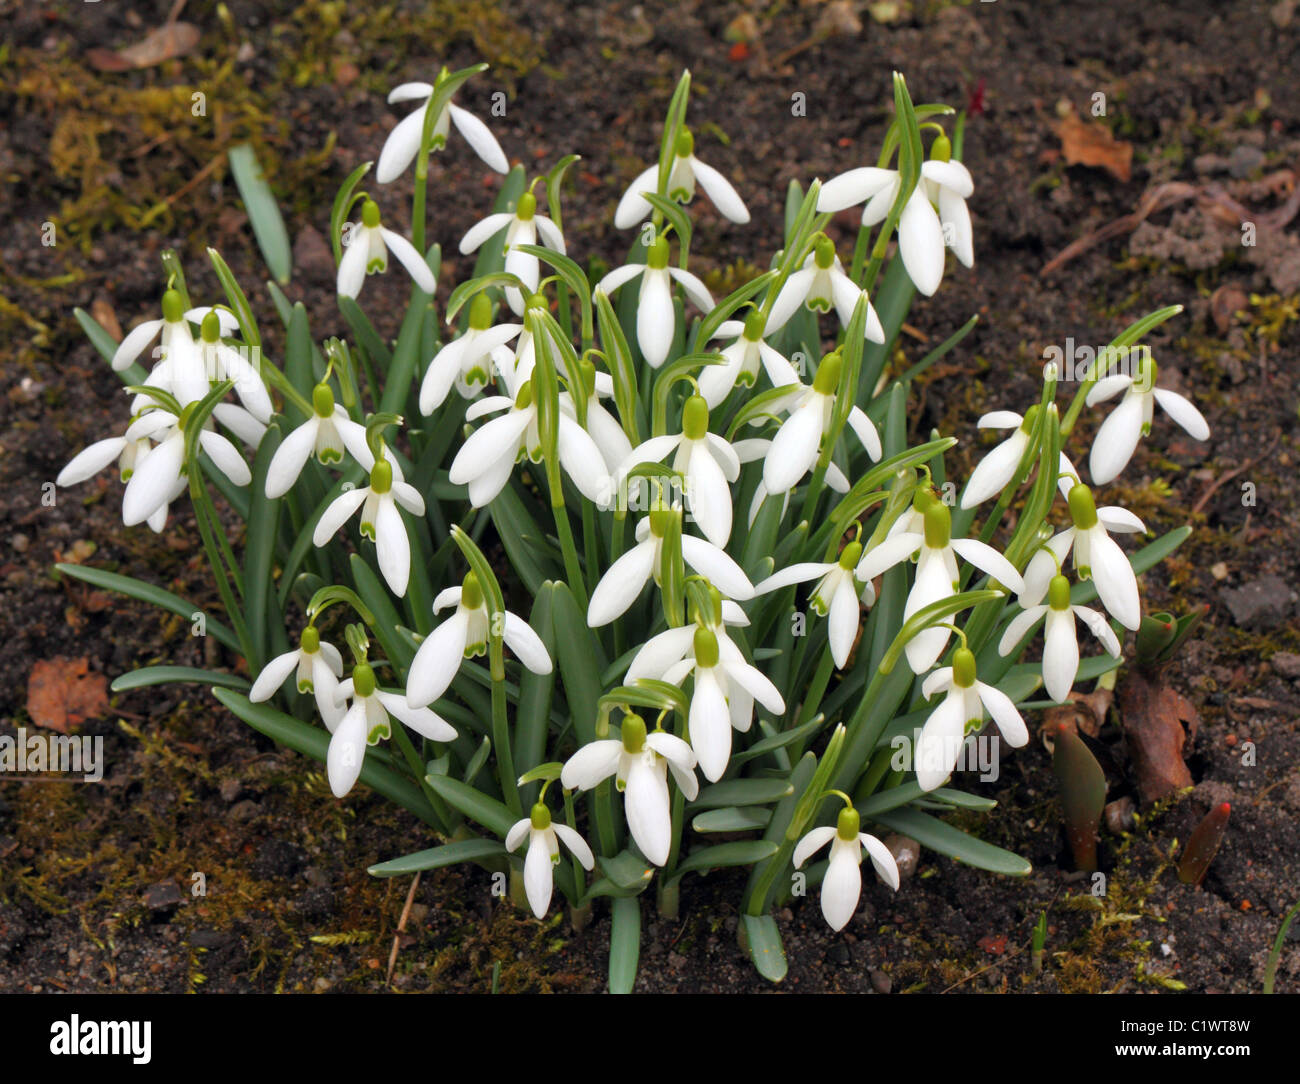 Snowdrops in full bloom Galanthus gracilis Stock Photo